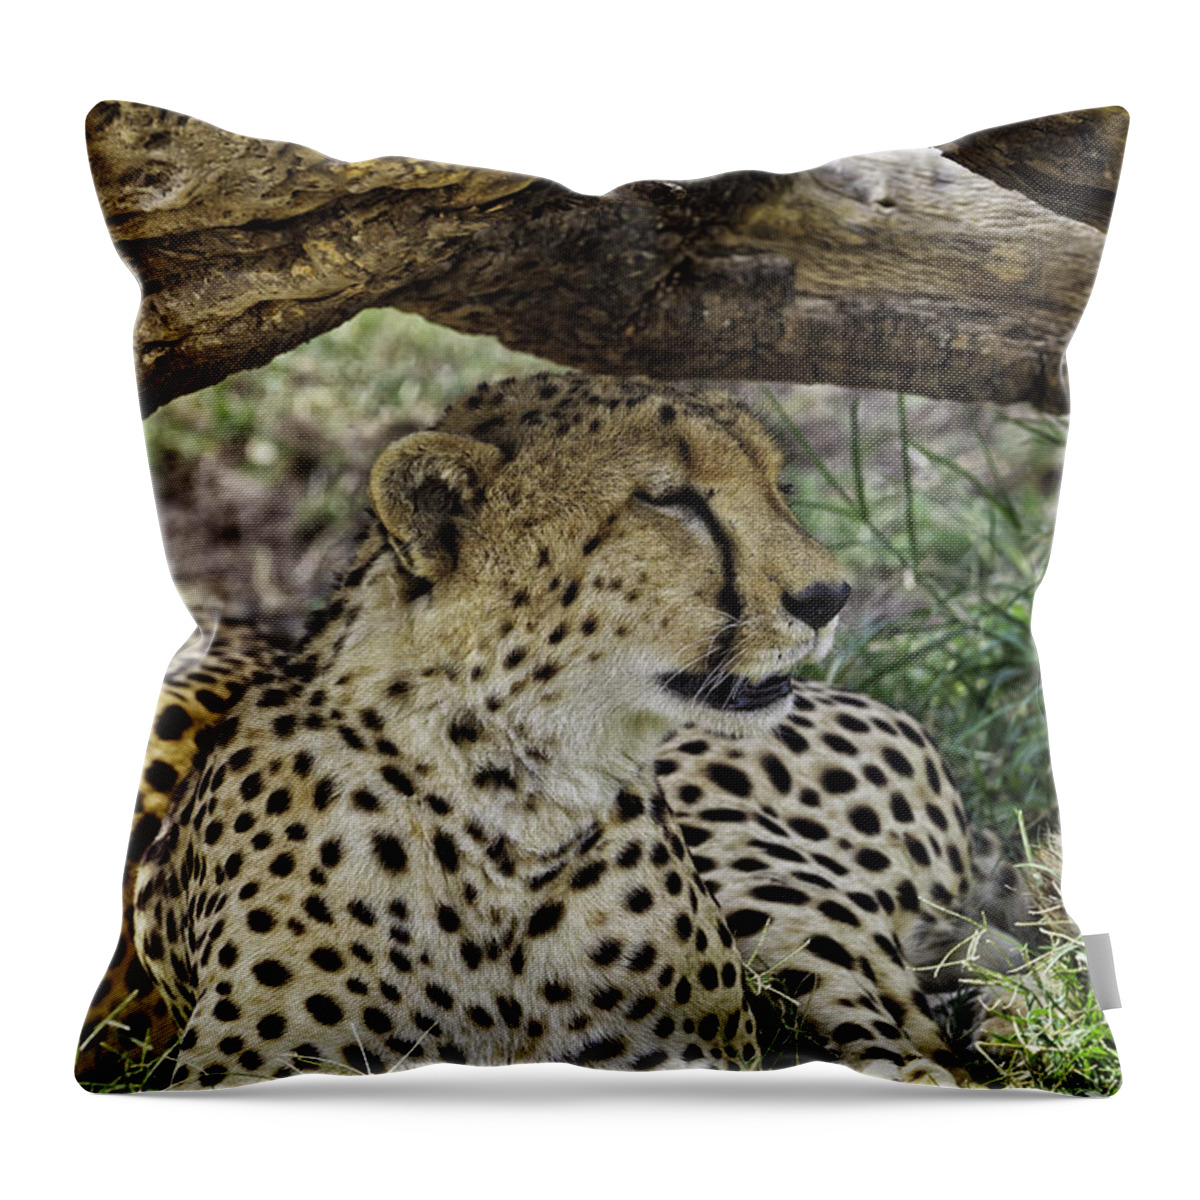 Africa Throw Pillow featuring the photograph Cheetah Resting by Perla Copernik